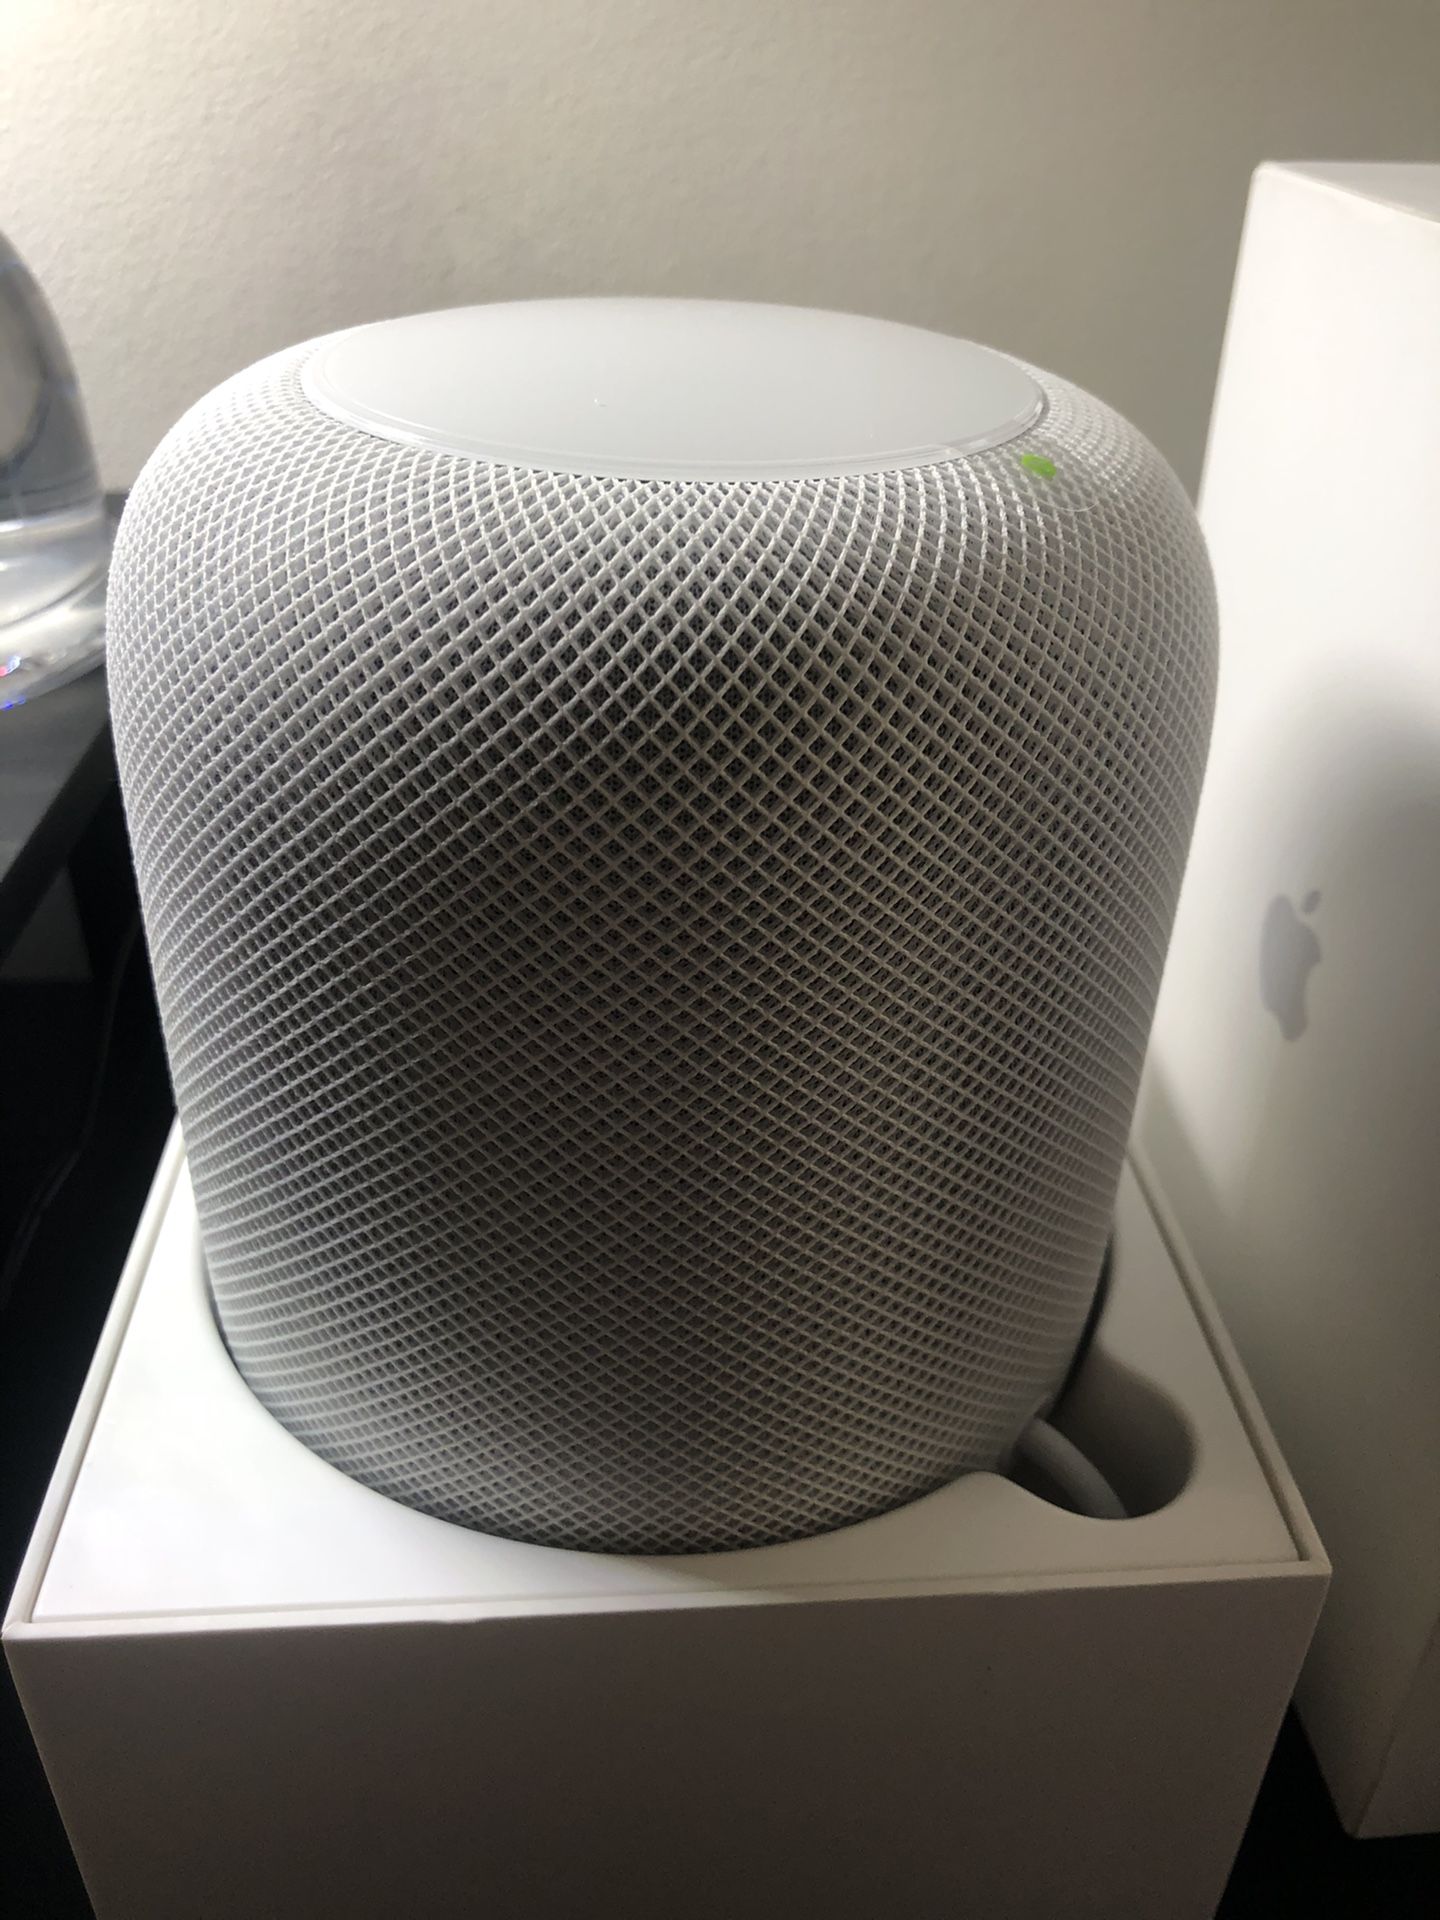 Never Used Homepod